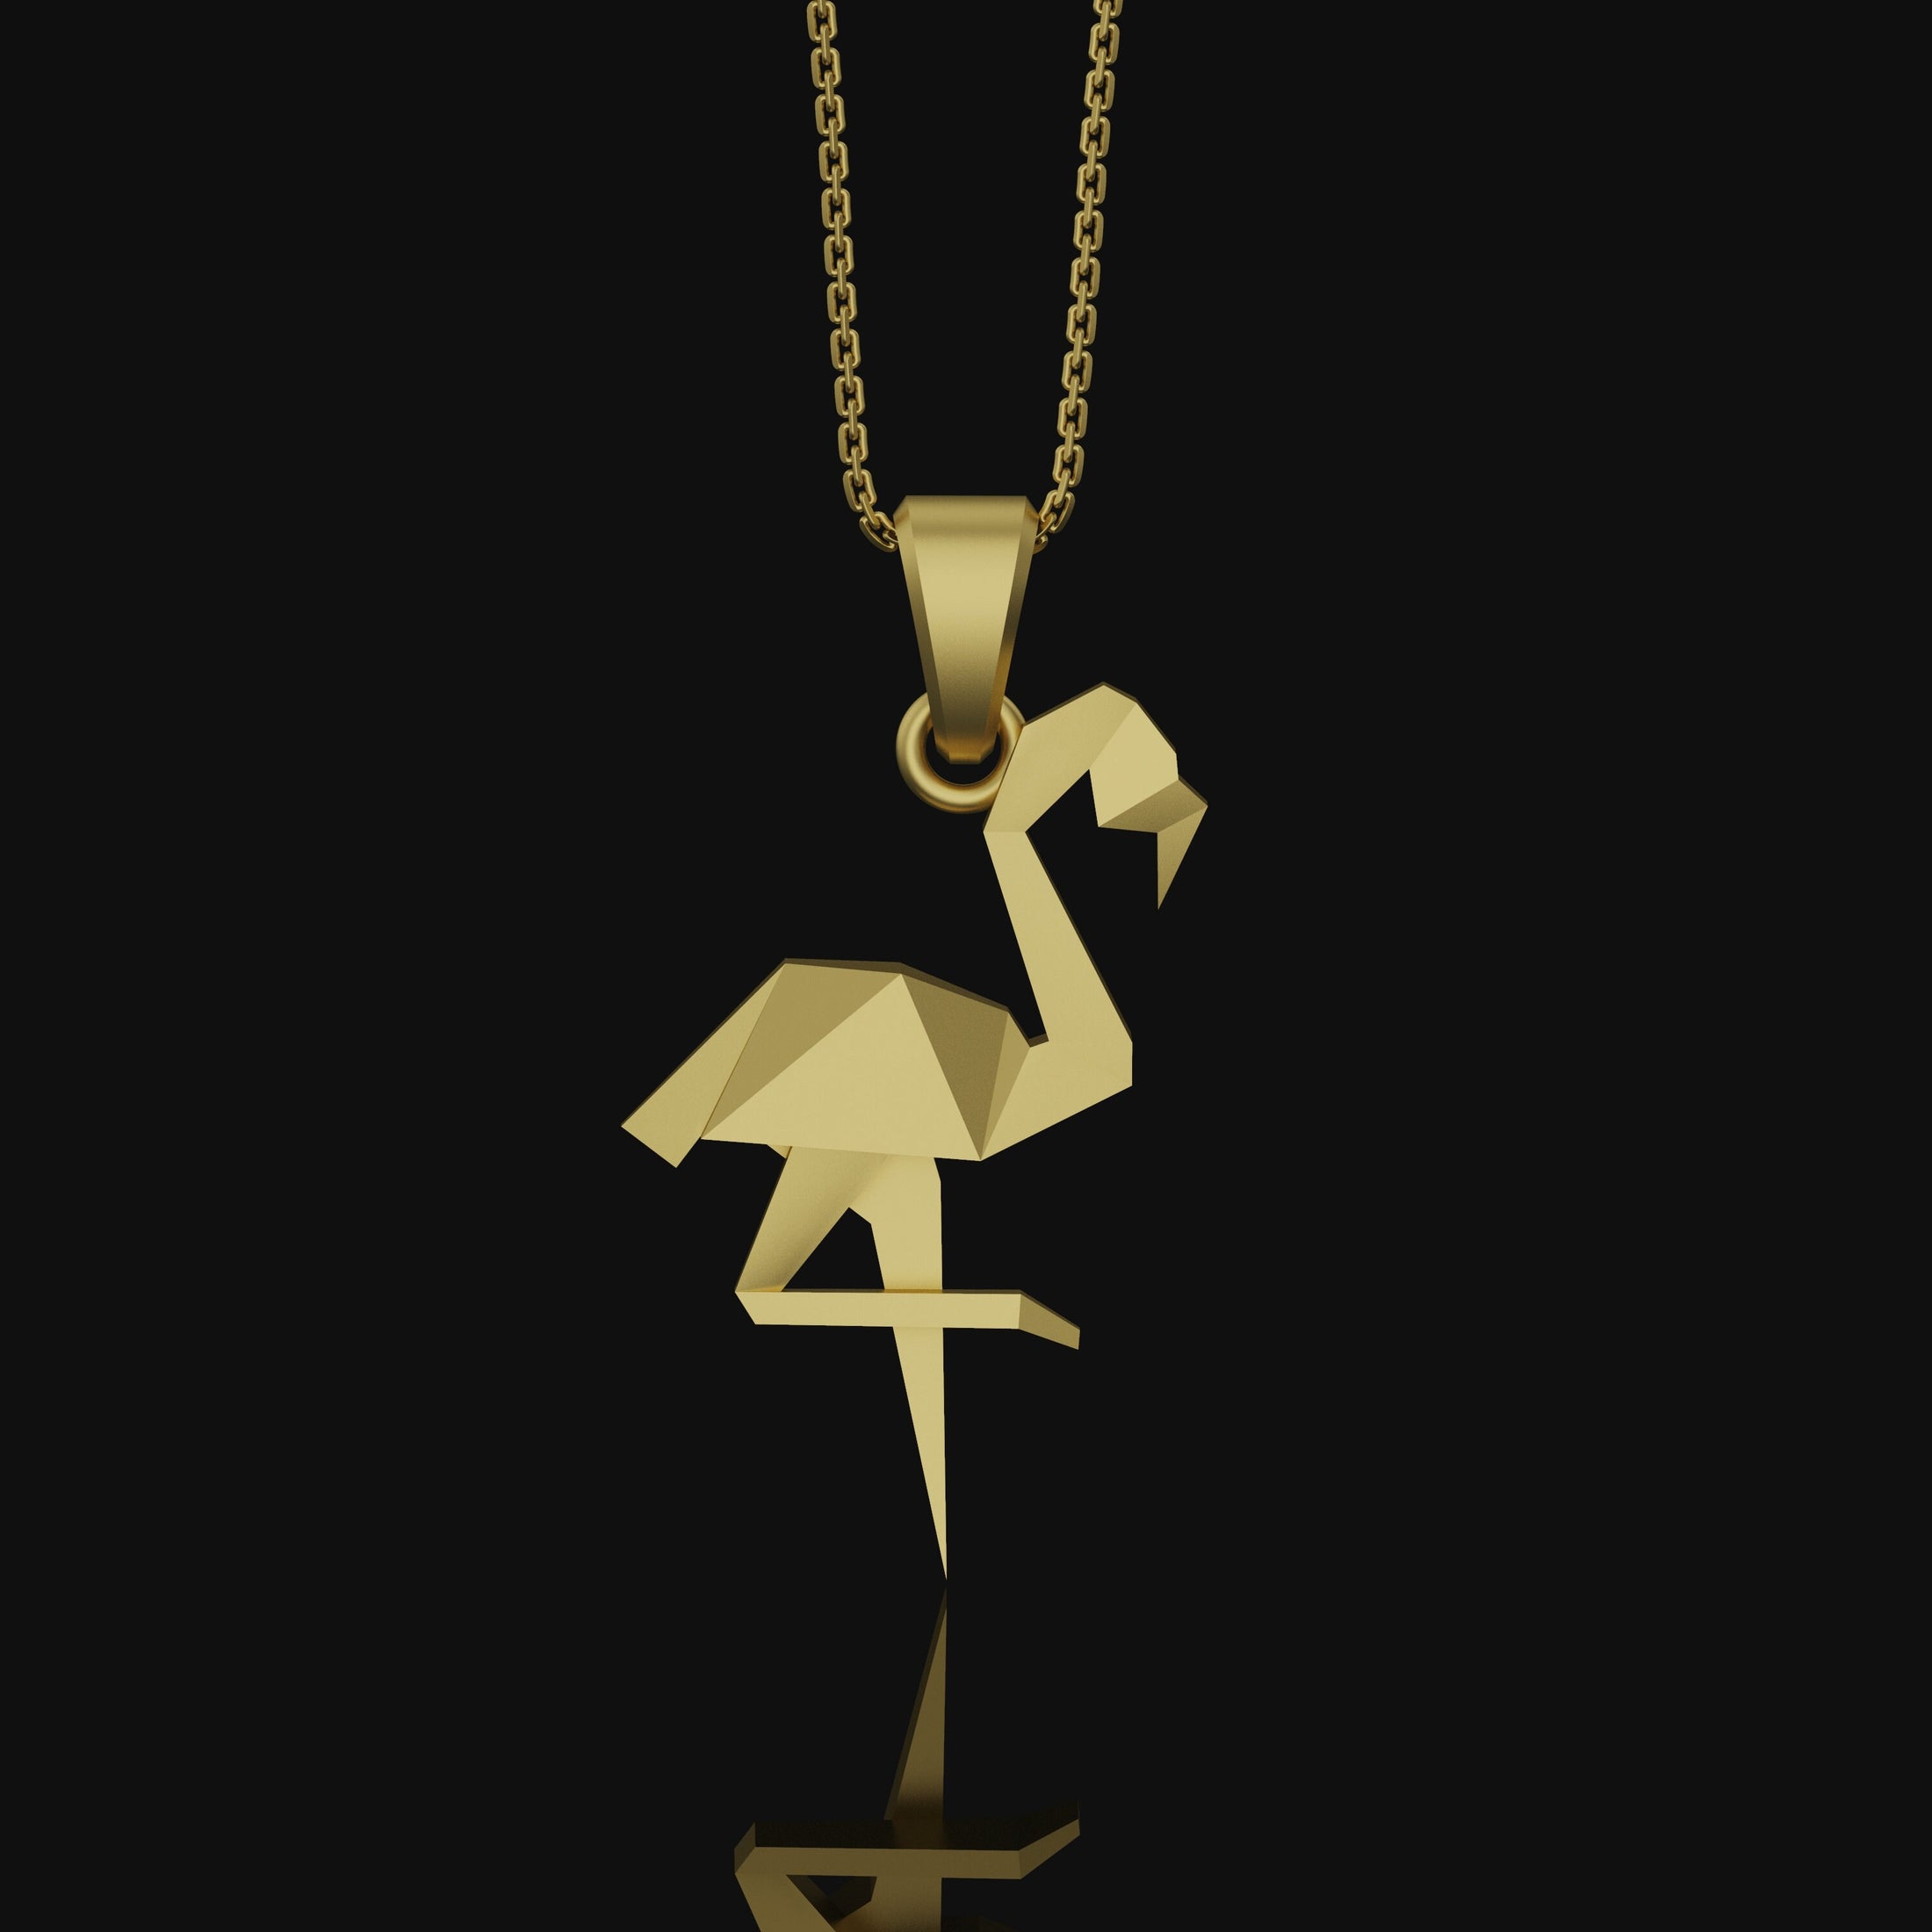 Silver Origami Flamingo Necklace Gift for her, Geometric Necklace, Bird Charm, Flamingo Pendant, Christmas Gift, Origami Animal Gold Finish